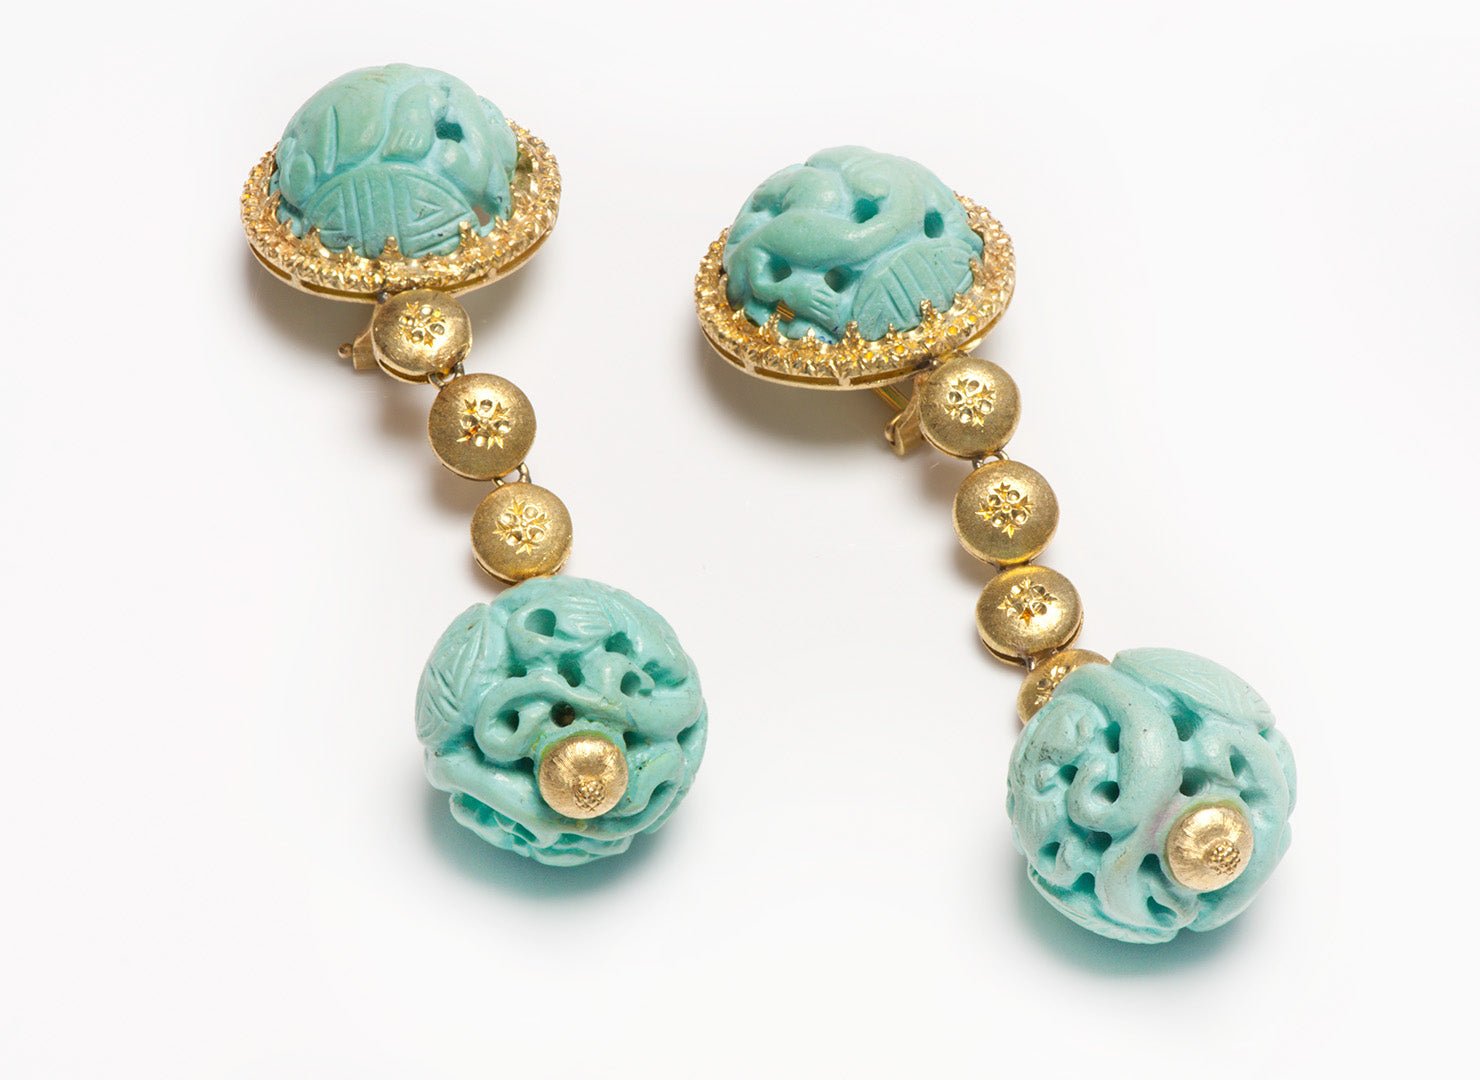 Buccellati 18K Gold Carved Turquoise Earrings